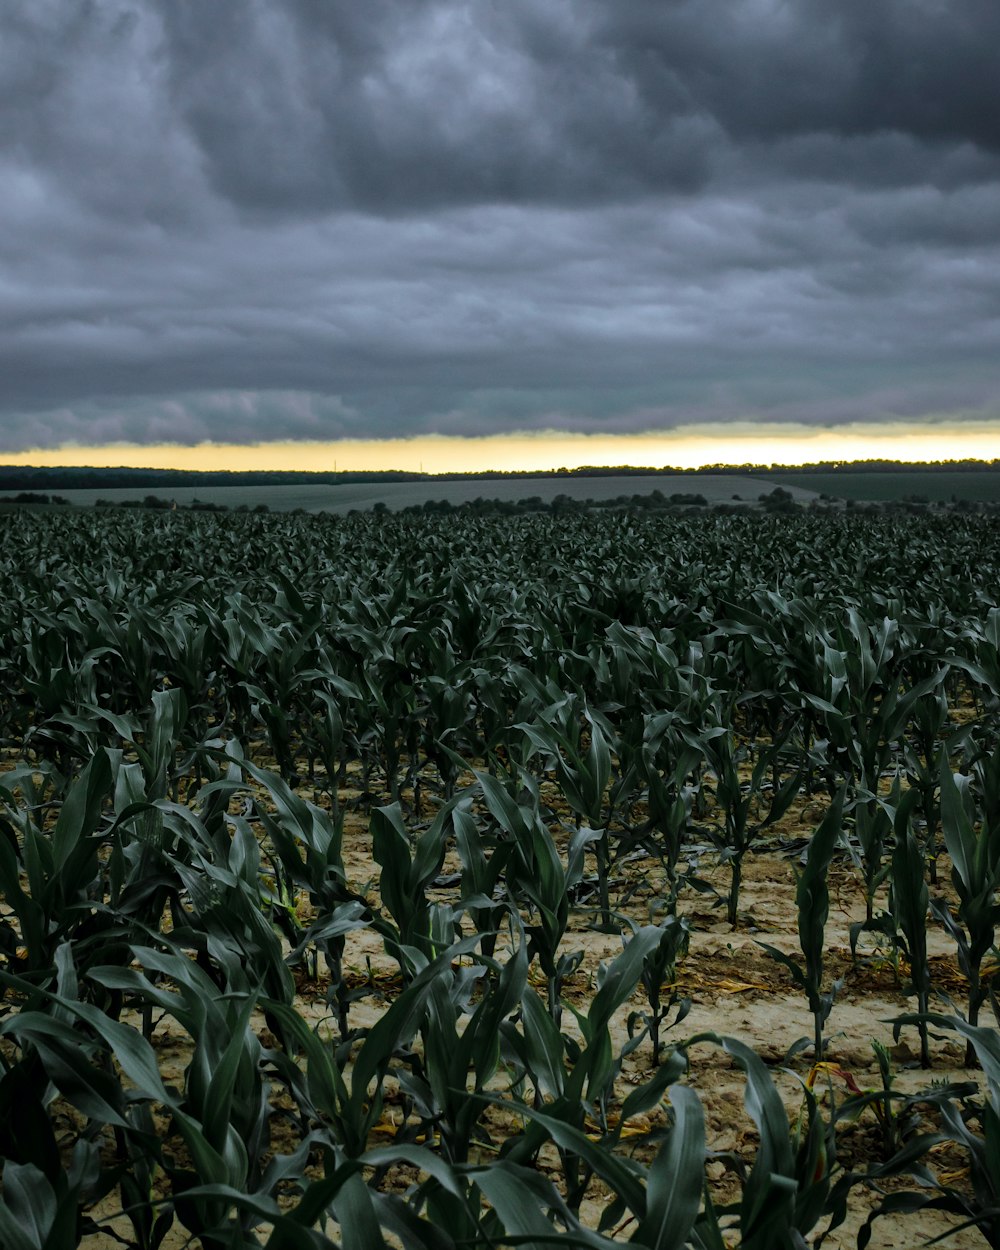 green corn field under cloudy sky during daytime